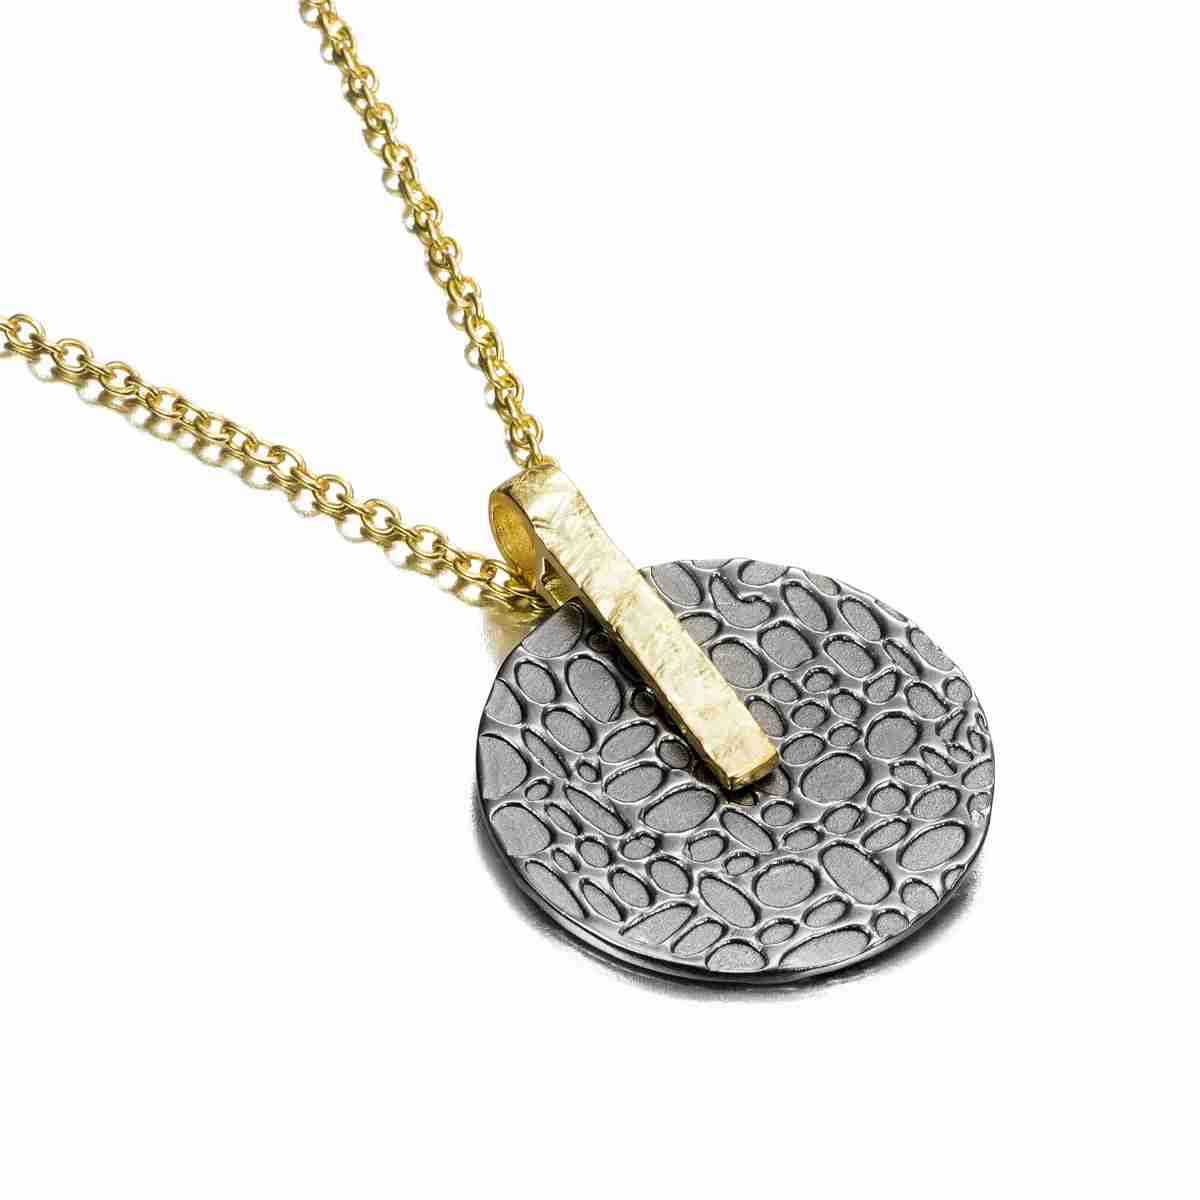 KYMBAL Pendant in Silver. Black Ruthenium and 18k Gold Vermeil